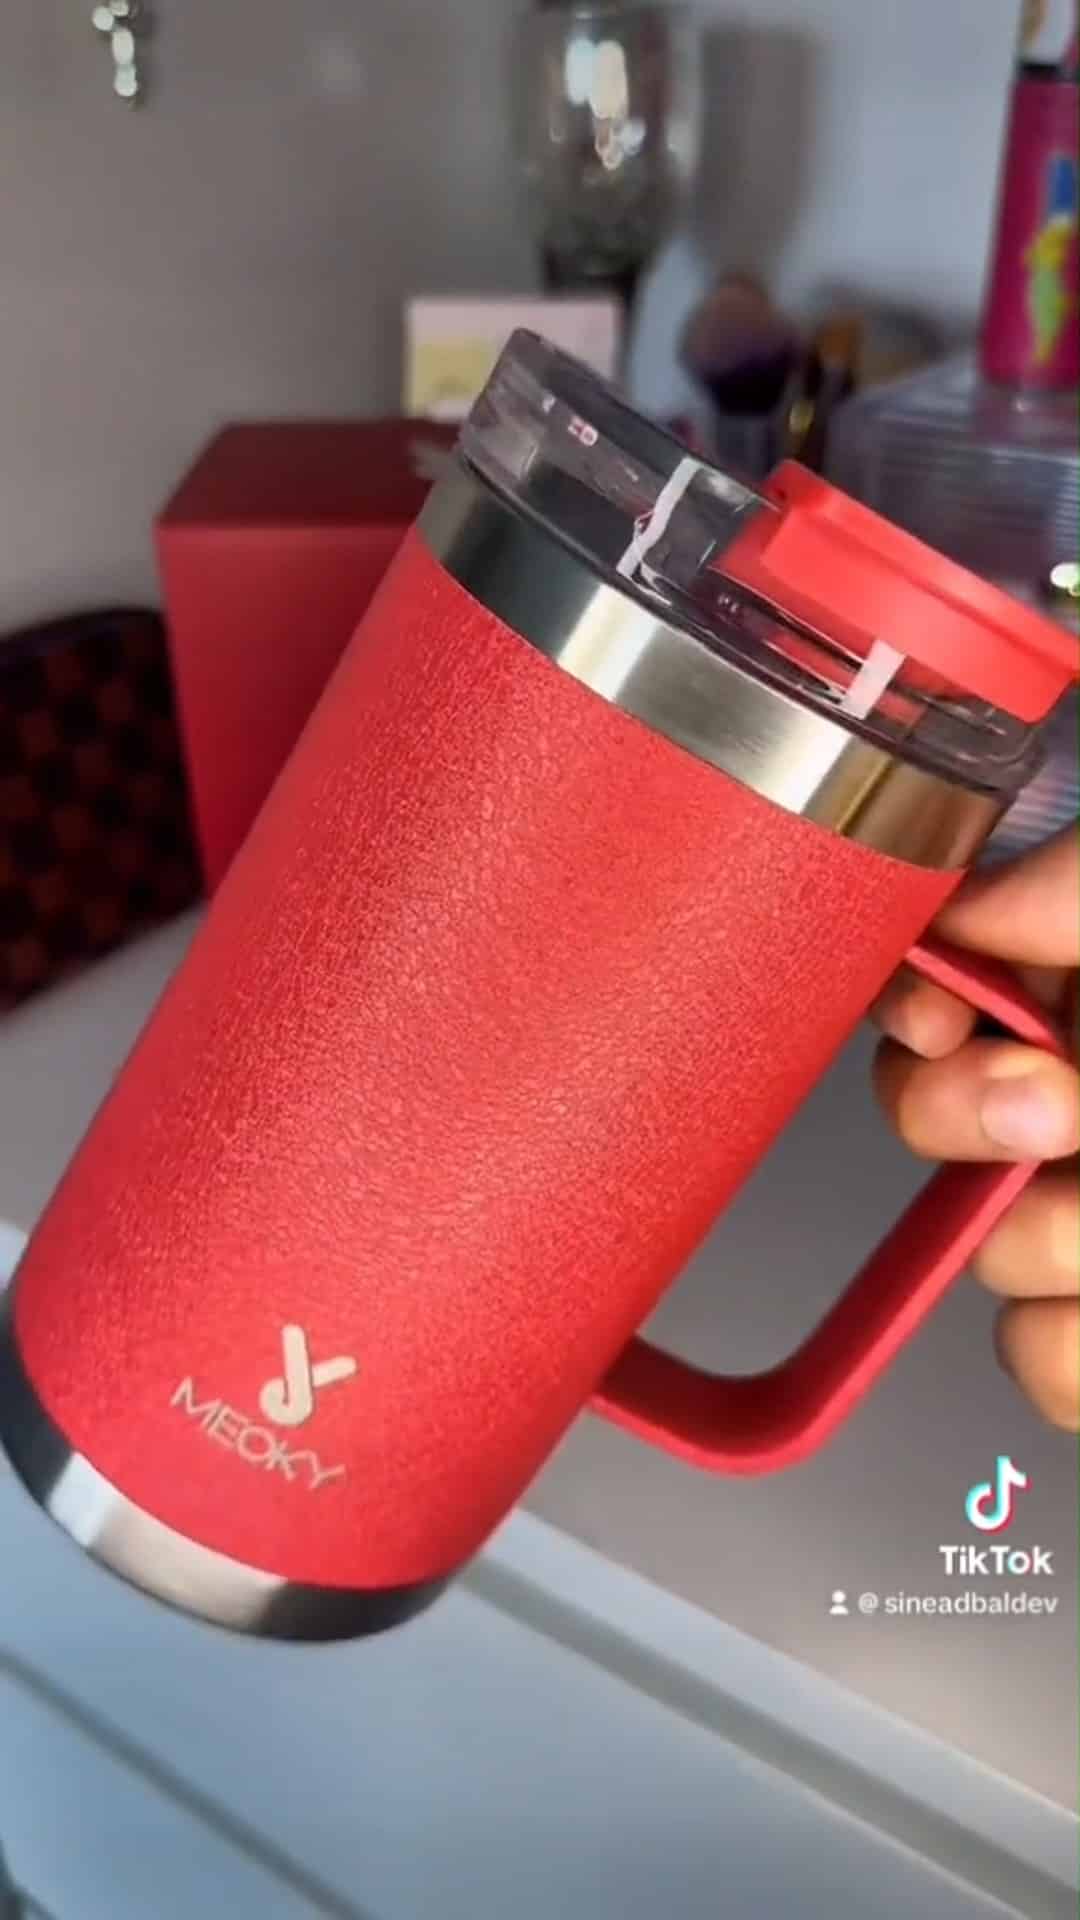 meoky 40 oz tumbler halloween mom of 5 meogy does not leak but stanley  does｜TikTok Search